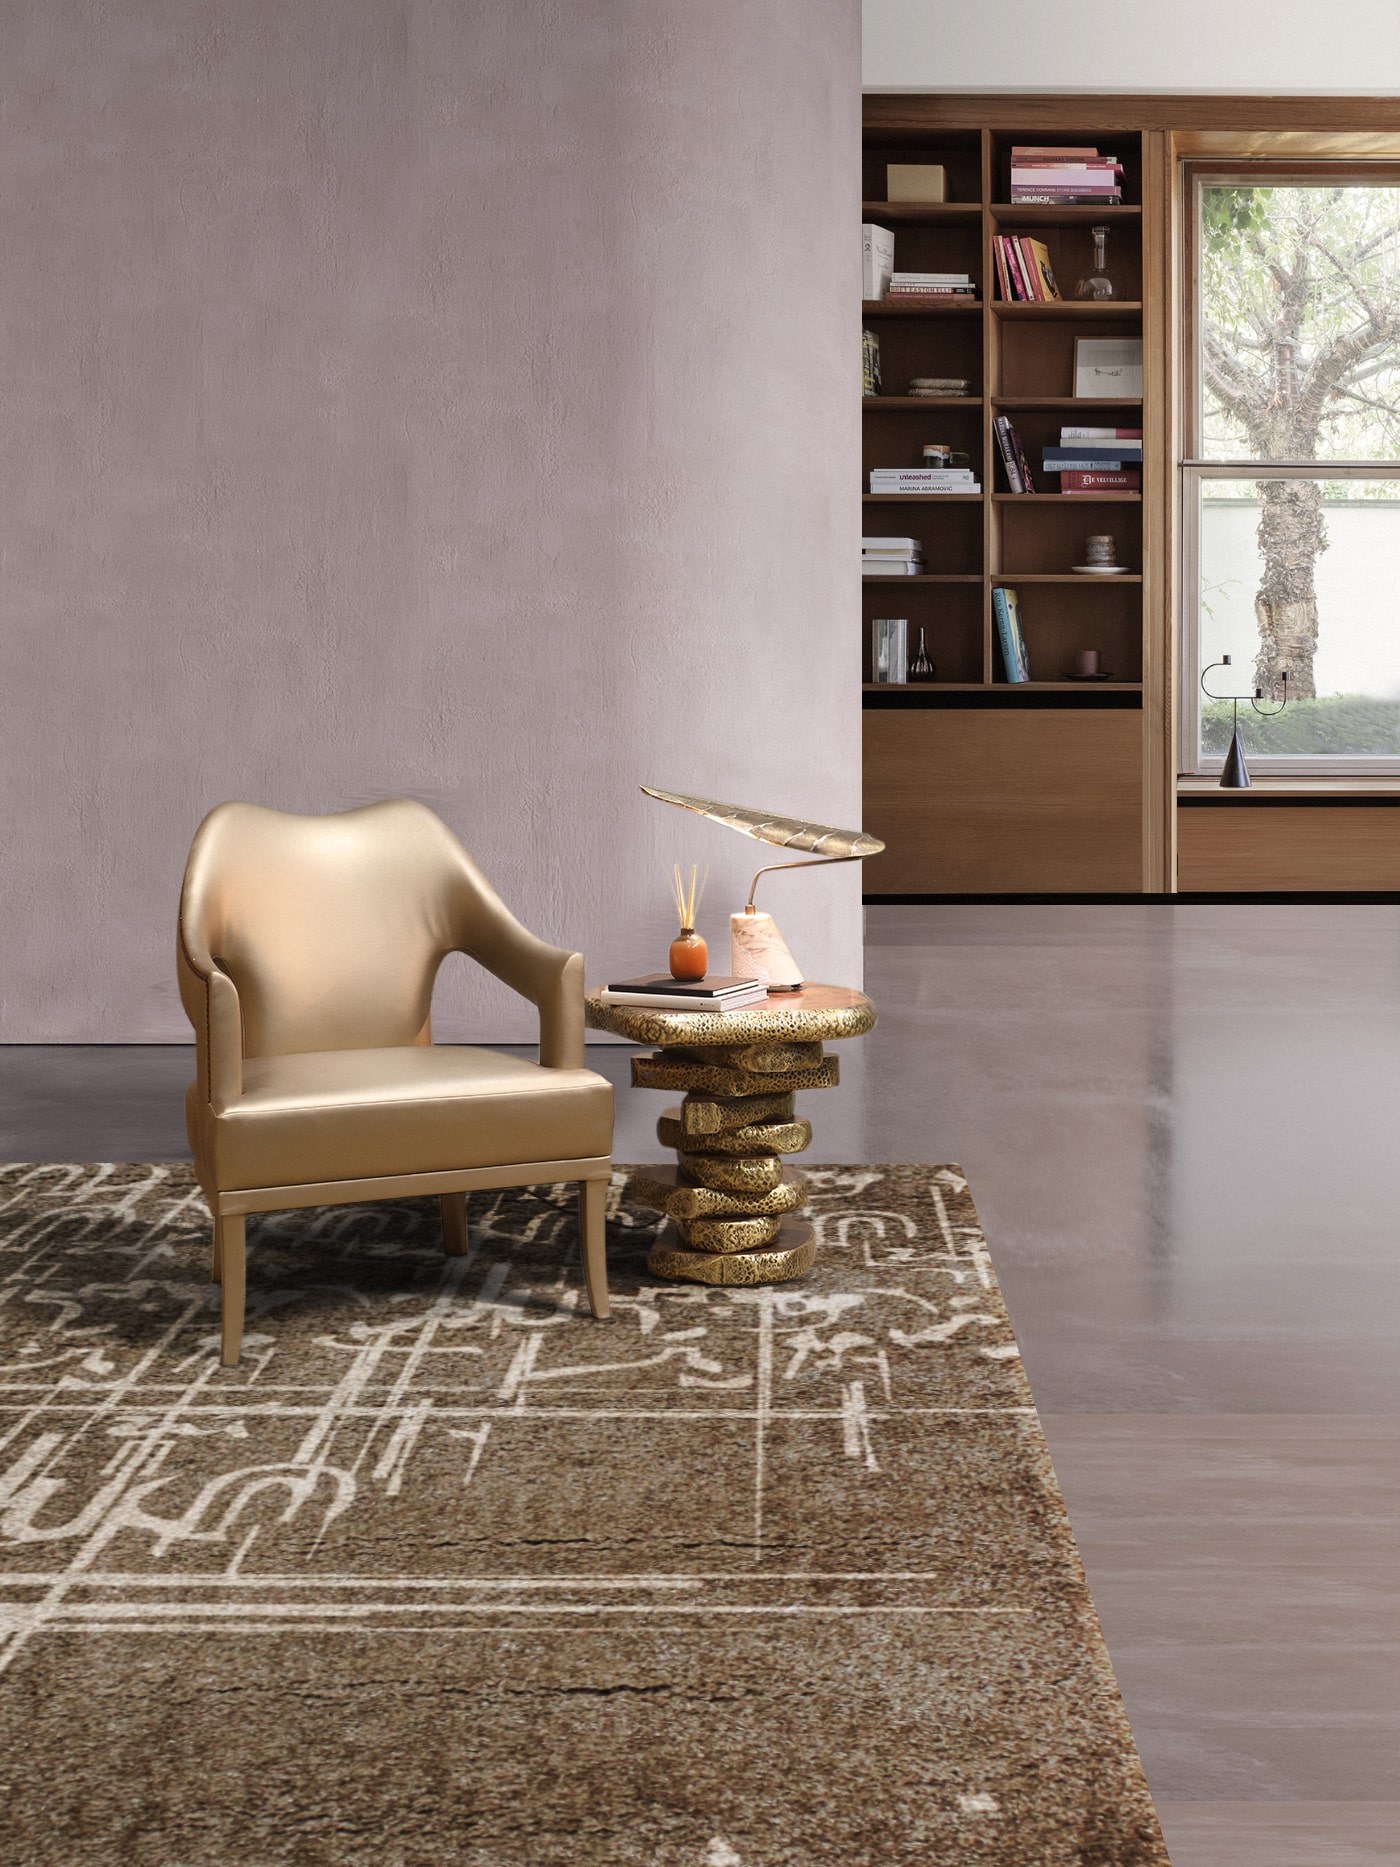 Modern Living Room in Brown Tones with Brass Side Table and Lamp - Home'Society